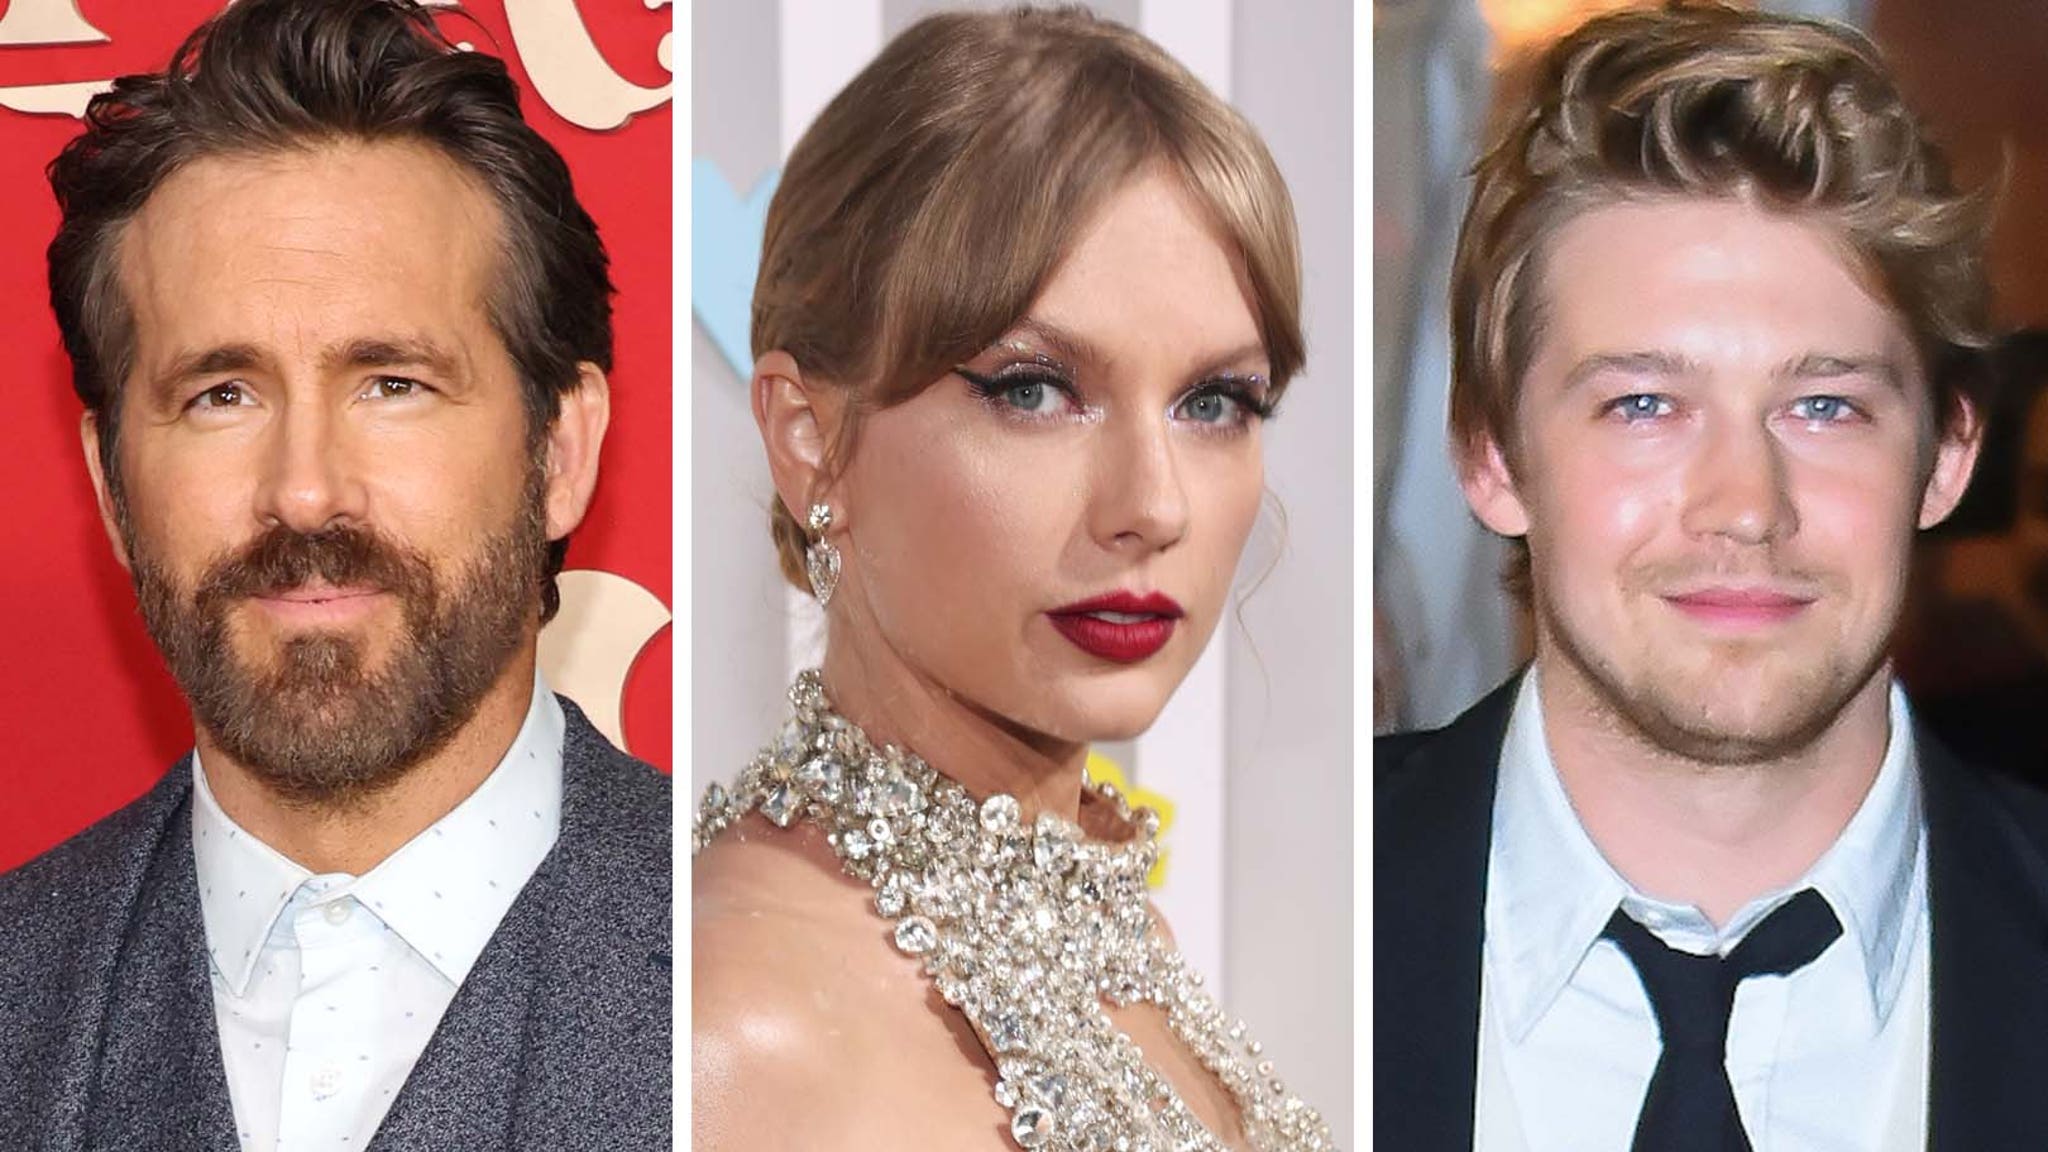 Ryan Reynolds Unfollows Joe Alwyn After Taylor Swift and Blake Lively Dinner, According to Swifties